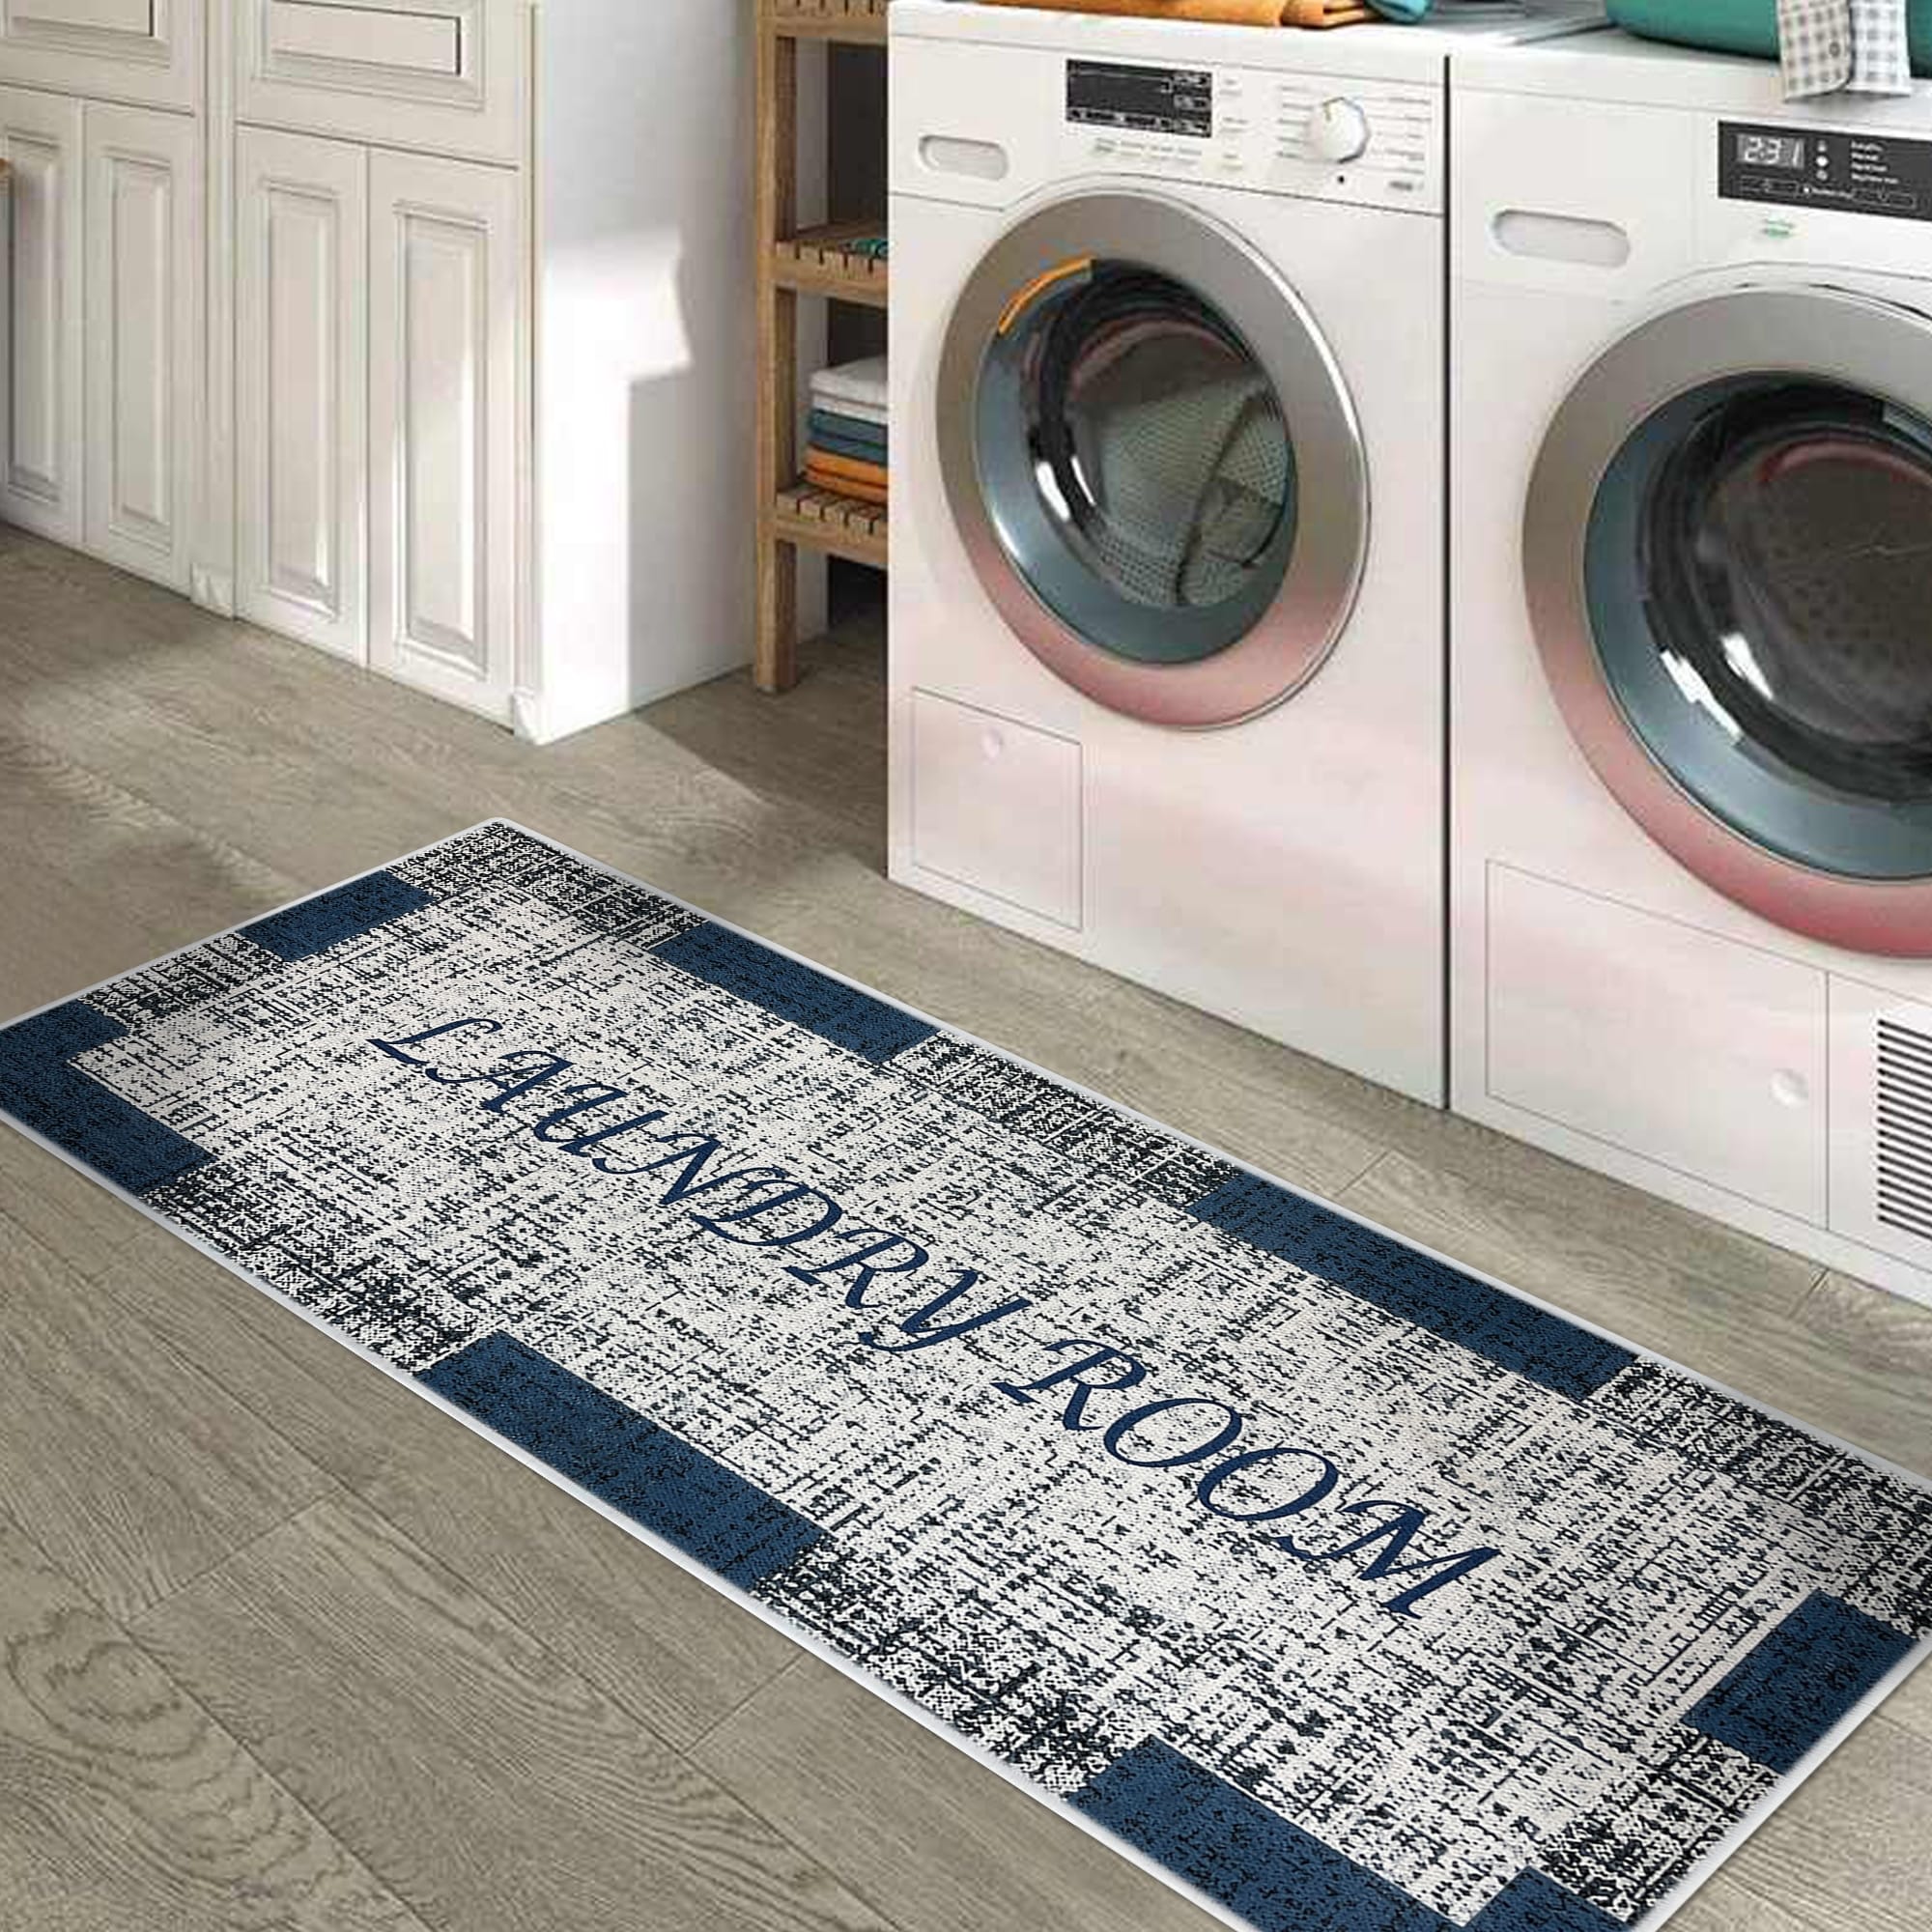 SussexHome Washable Ultra Thin Cotton Laundry Room Rug Runner - 20